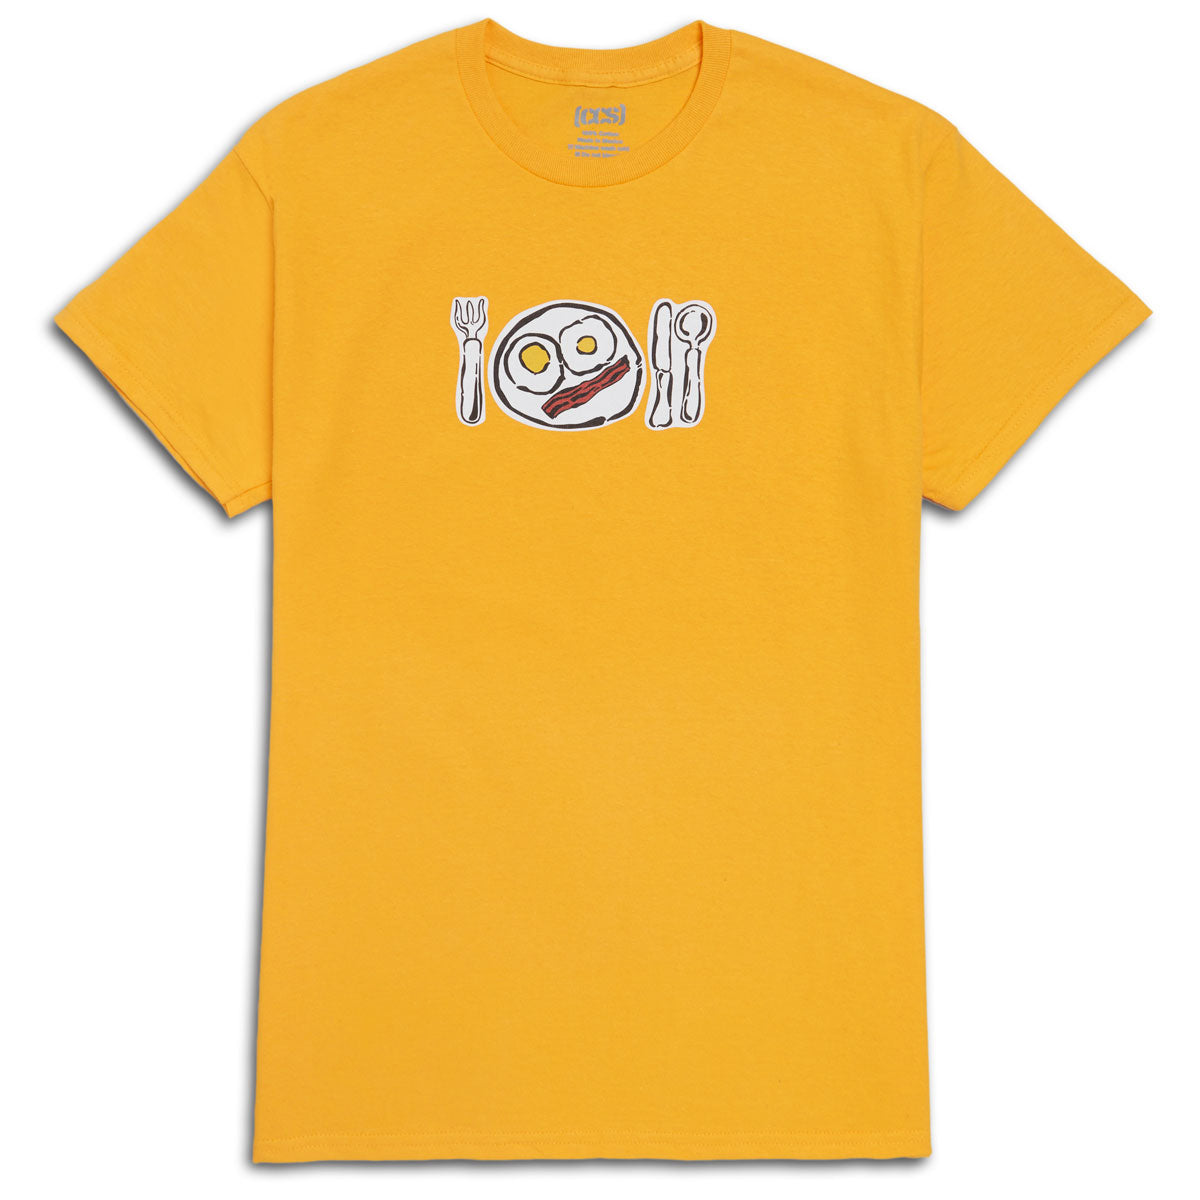 CCS Over Easy T-Shirt - Gold - MD image 1